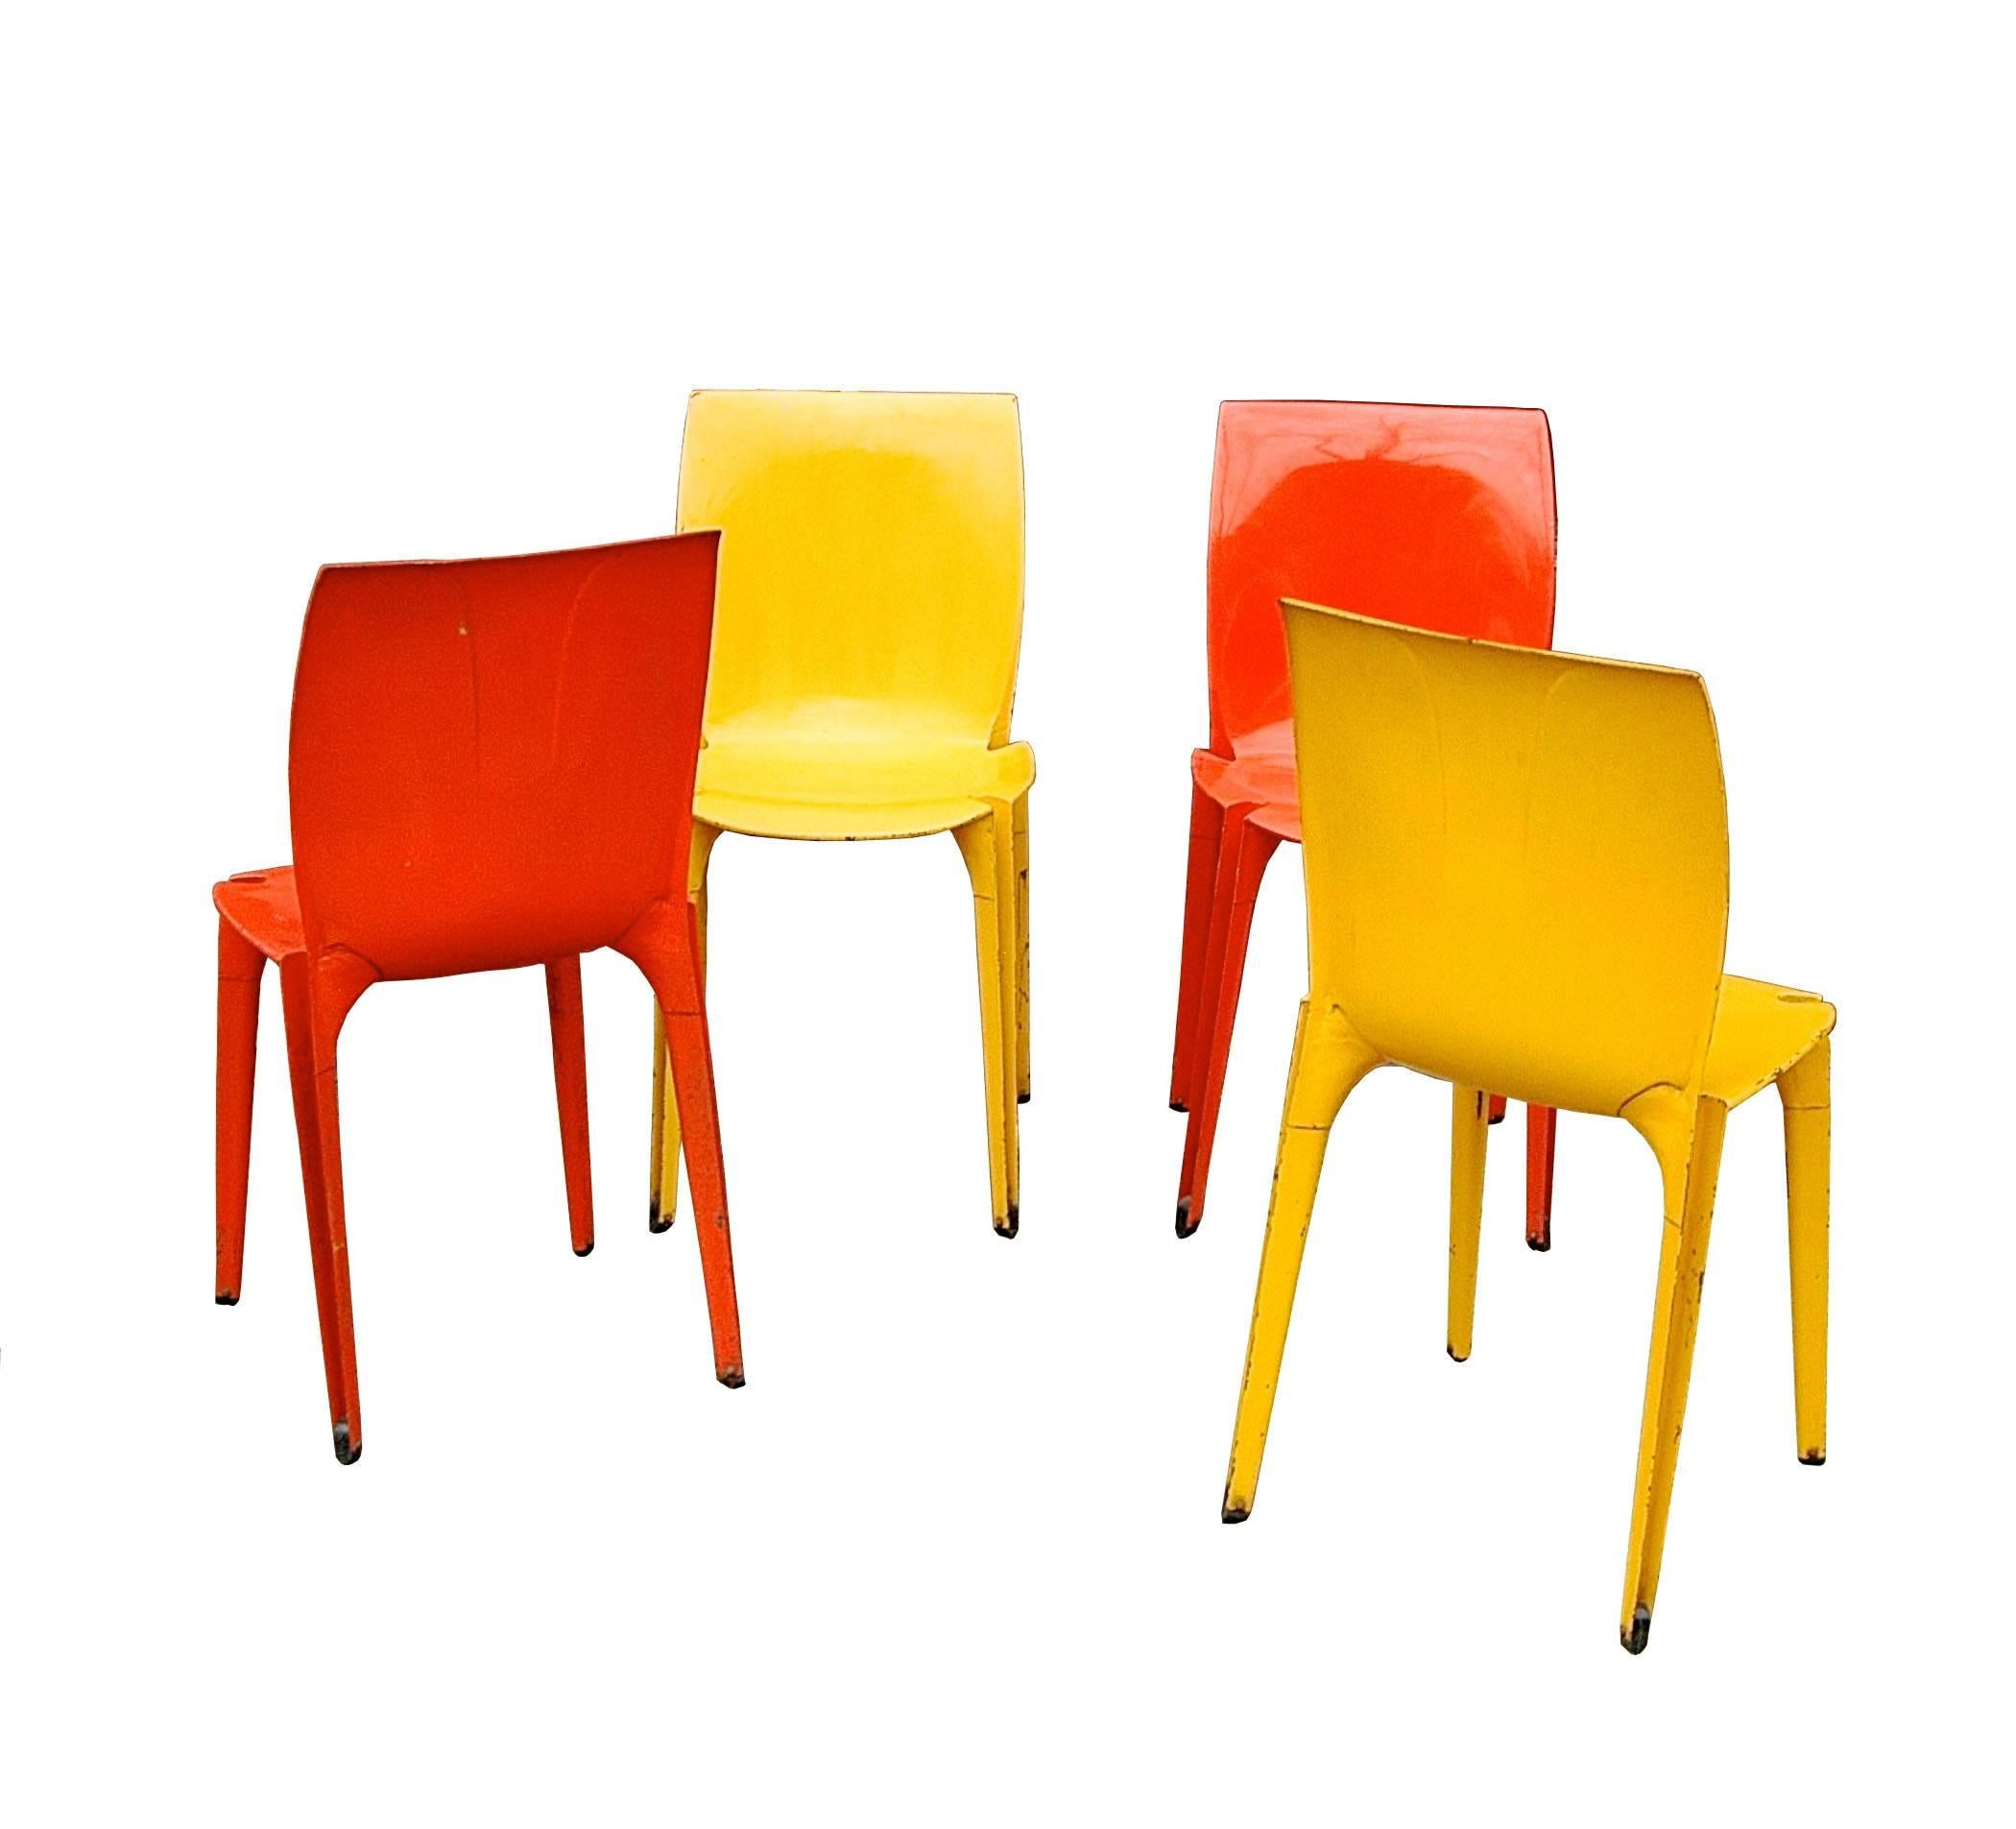 Set of four, limited edition, stamped and enameled metal “Lambda” chairs designed by architect Marco Zanuso for Gavina, Italy.